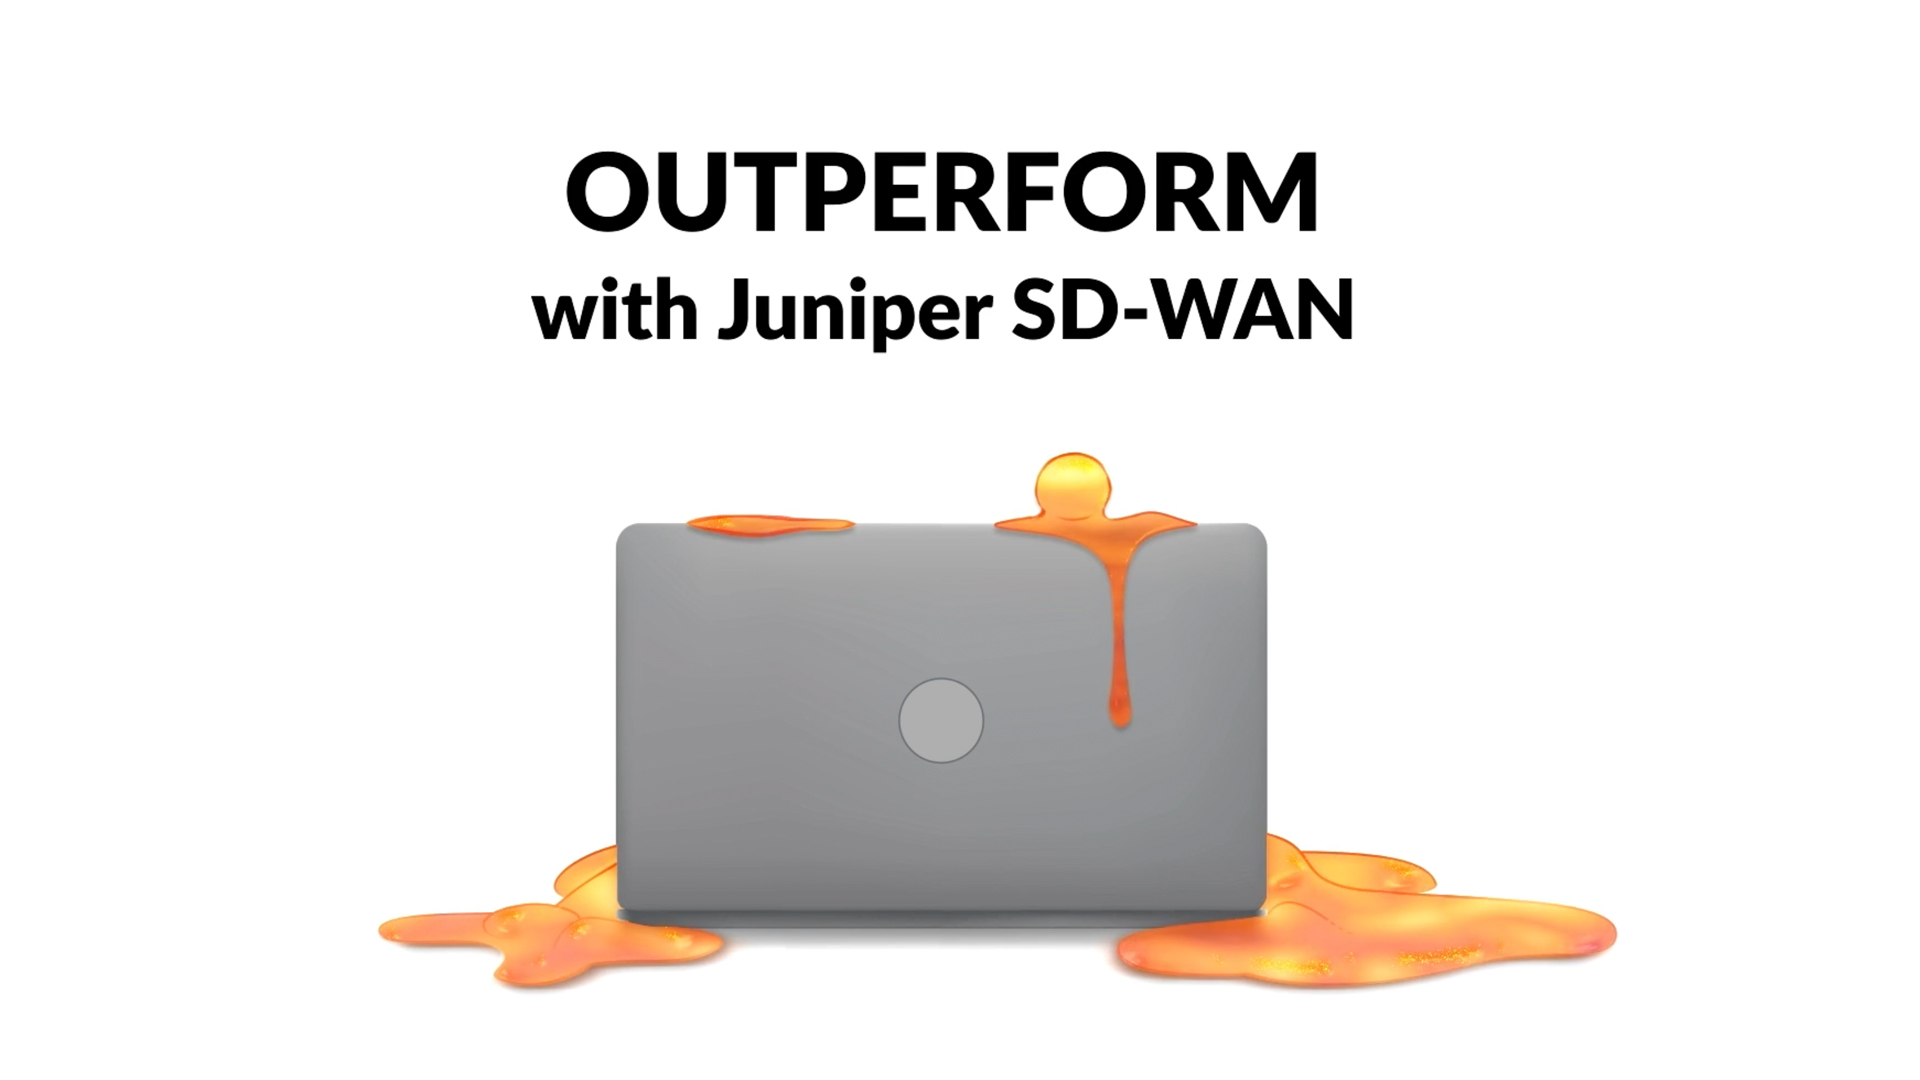 Images from our Juniper SD-Wan animated video series. The image shows comic like ooze coming out of a laptop with the text Outperform with Juniper SD-WAN above it.